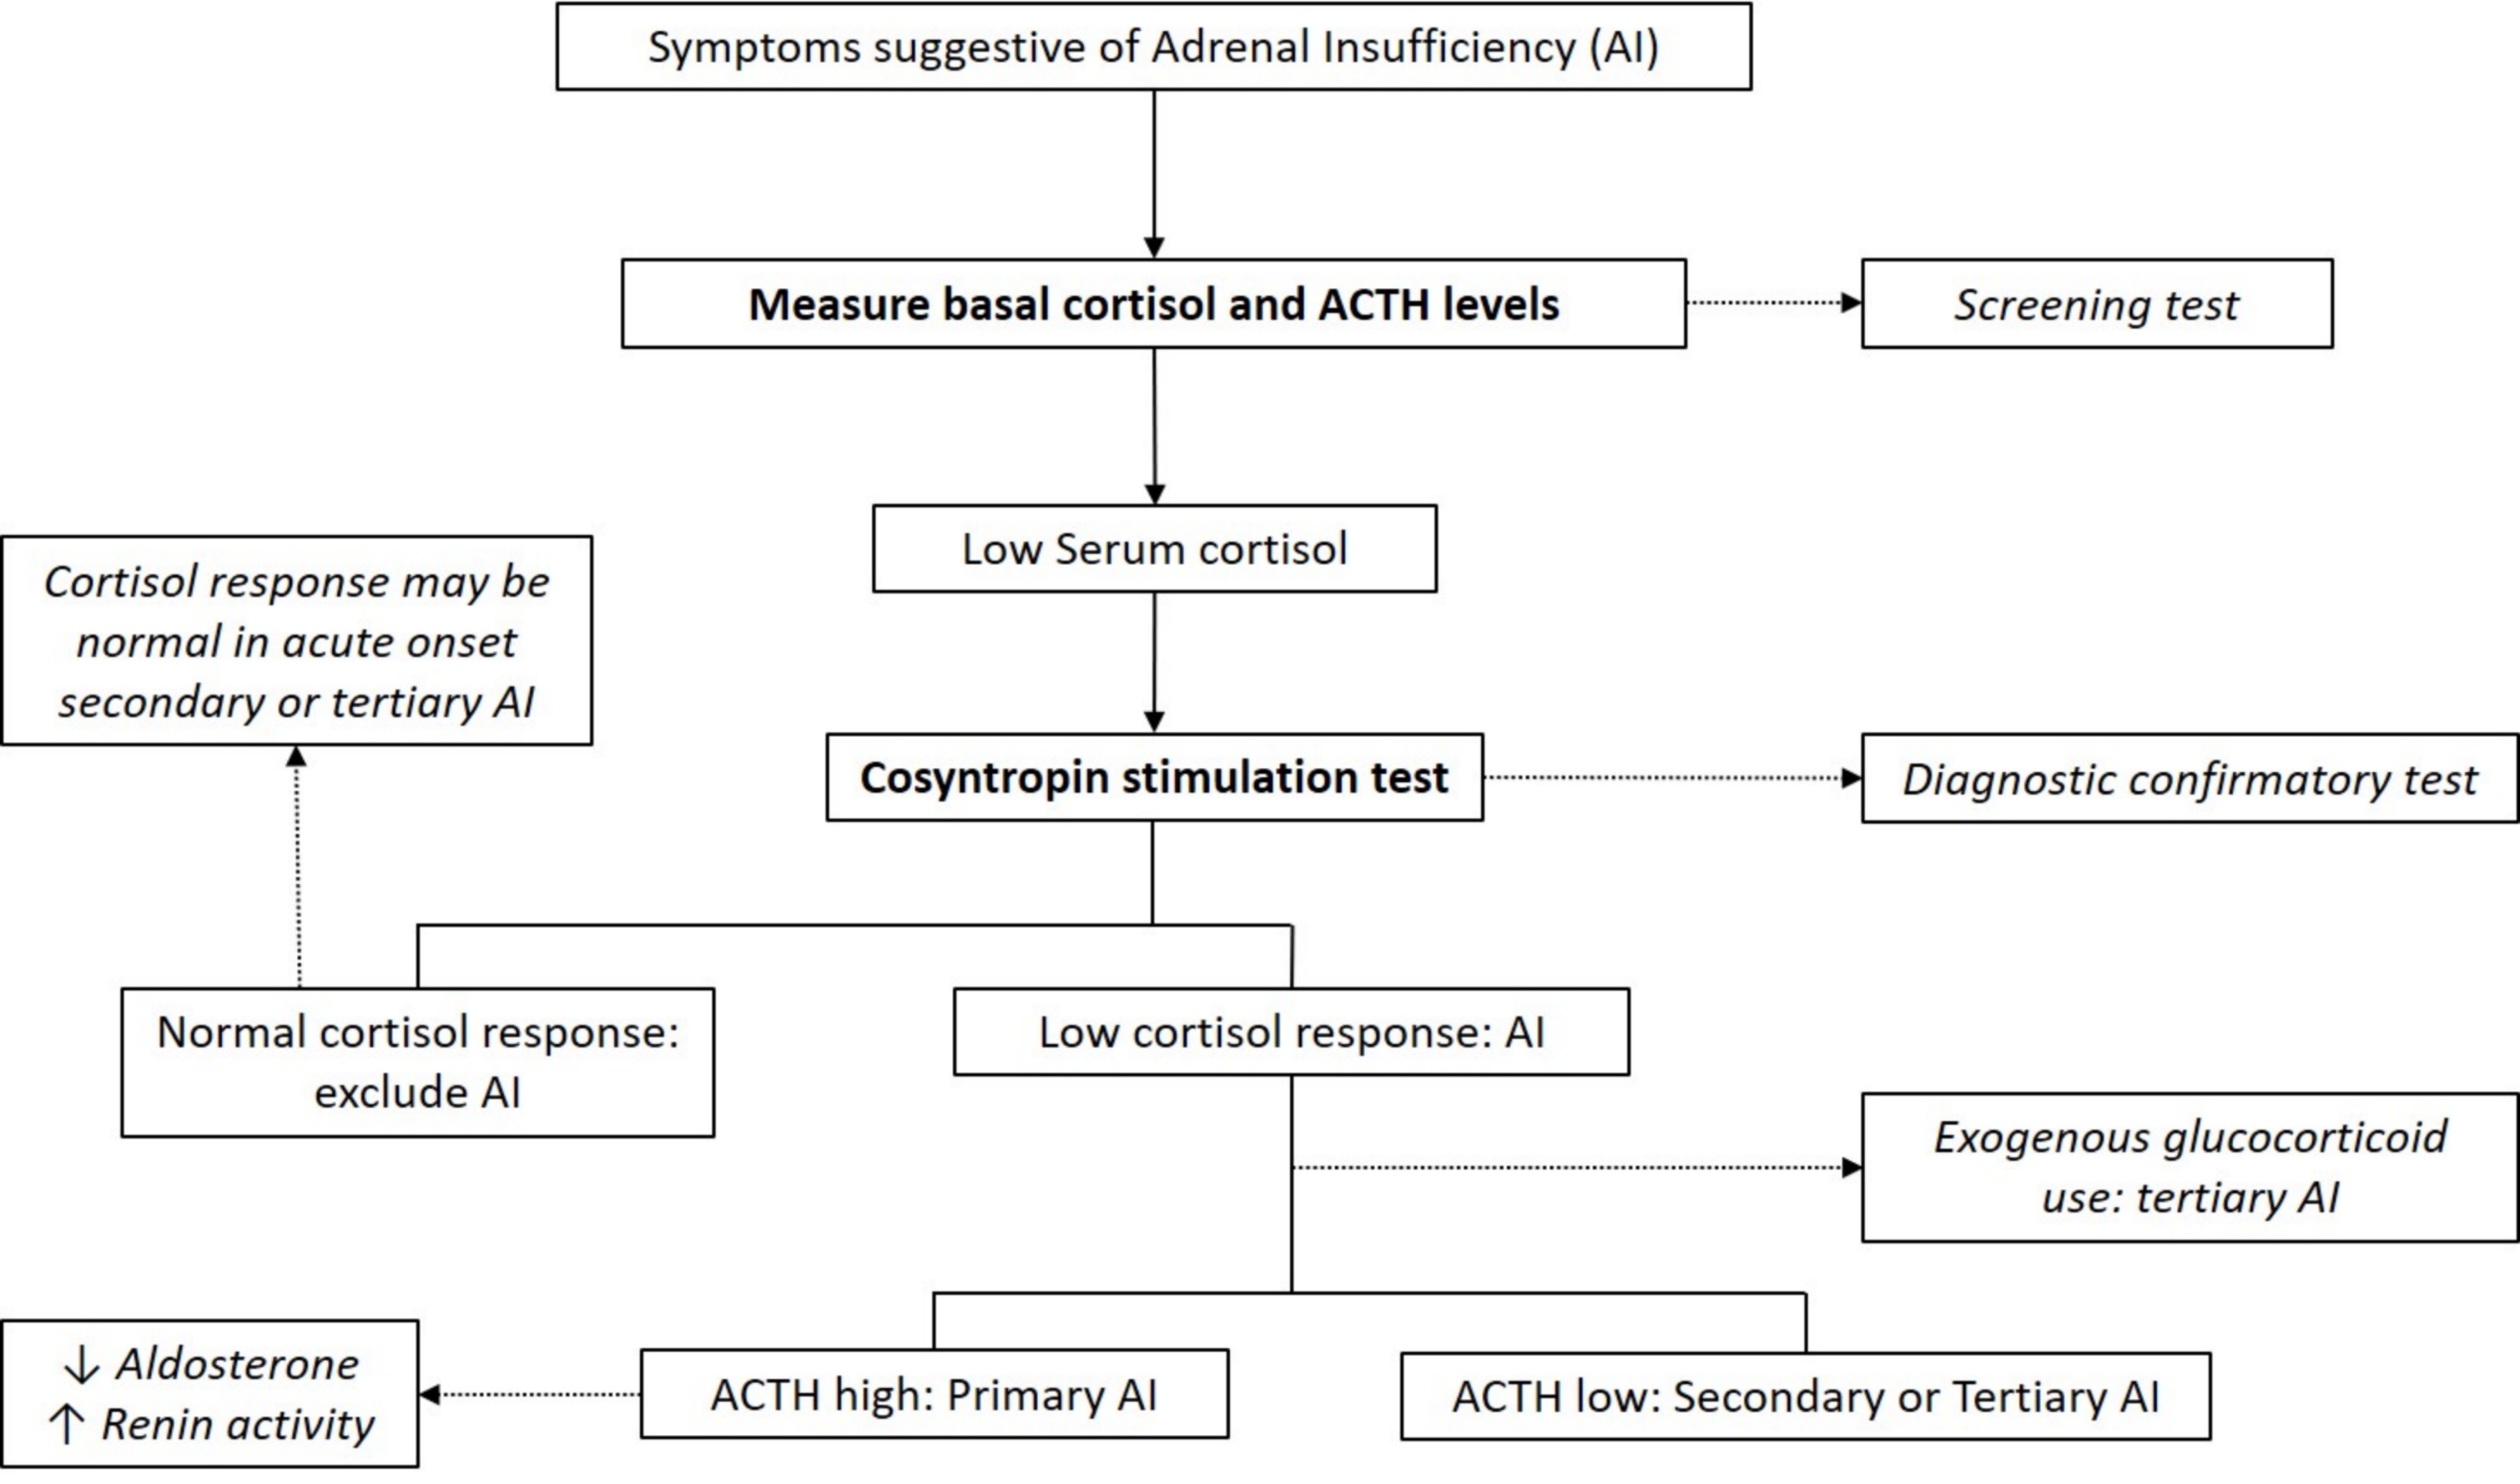 Serum cortisol testing for suspected adrenal insufficiency - The